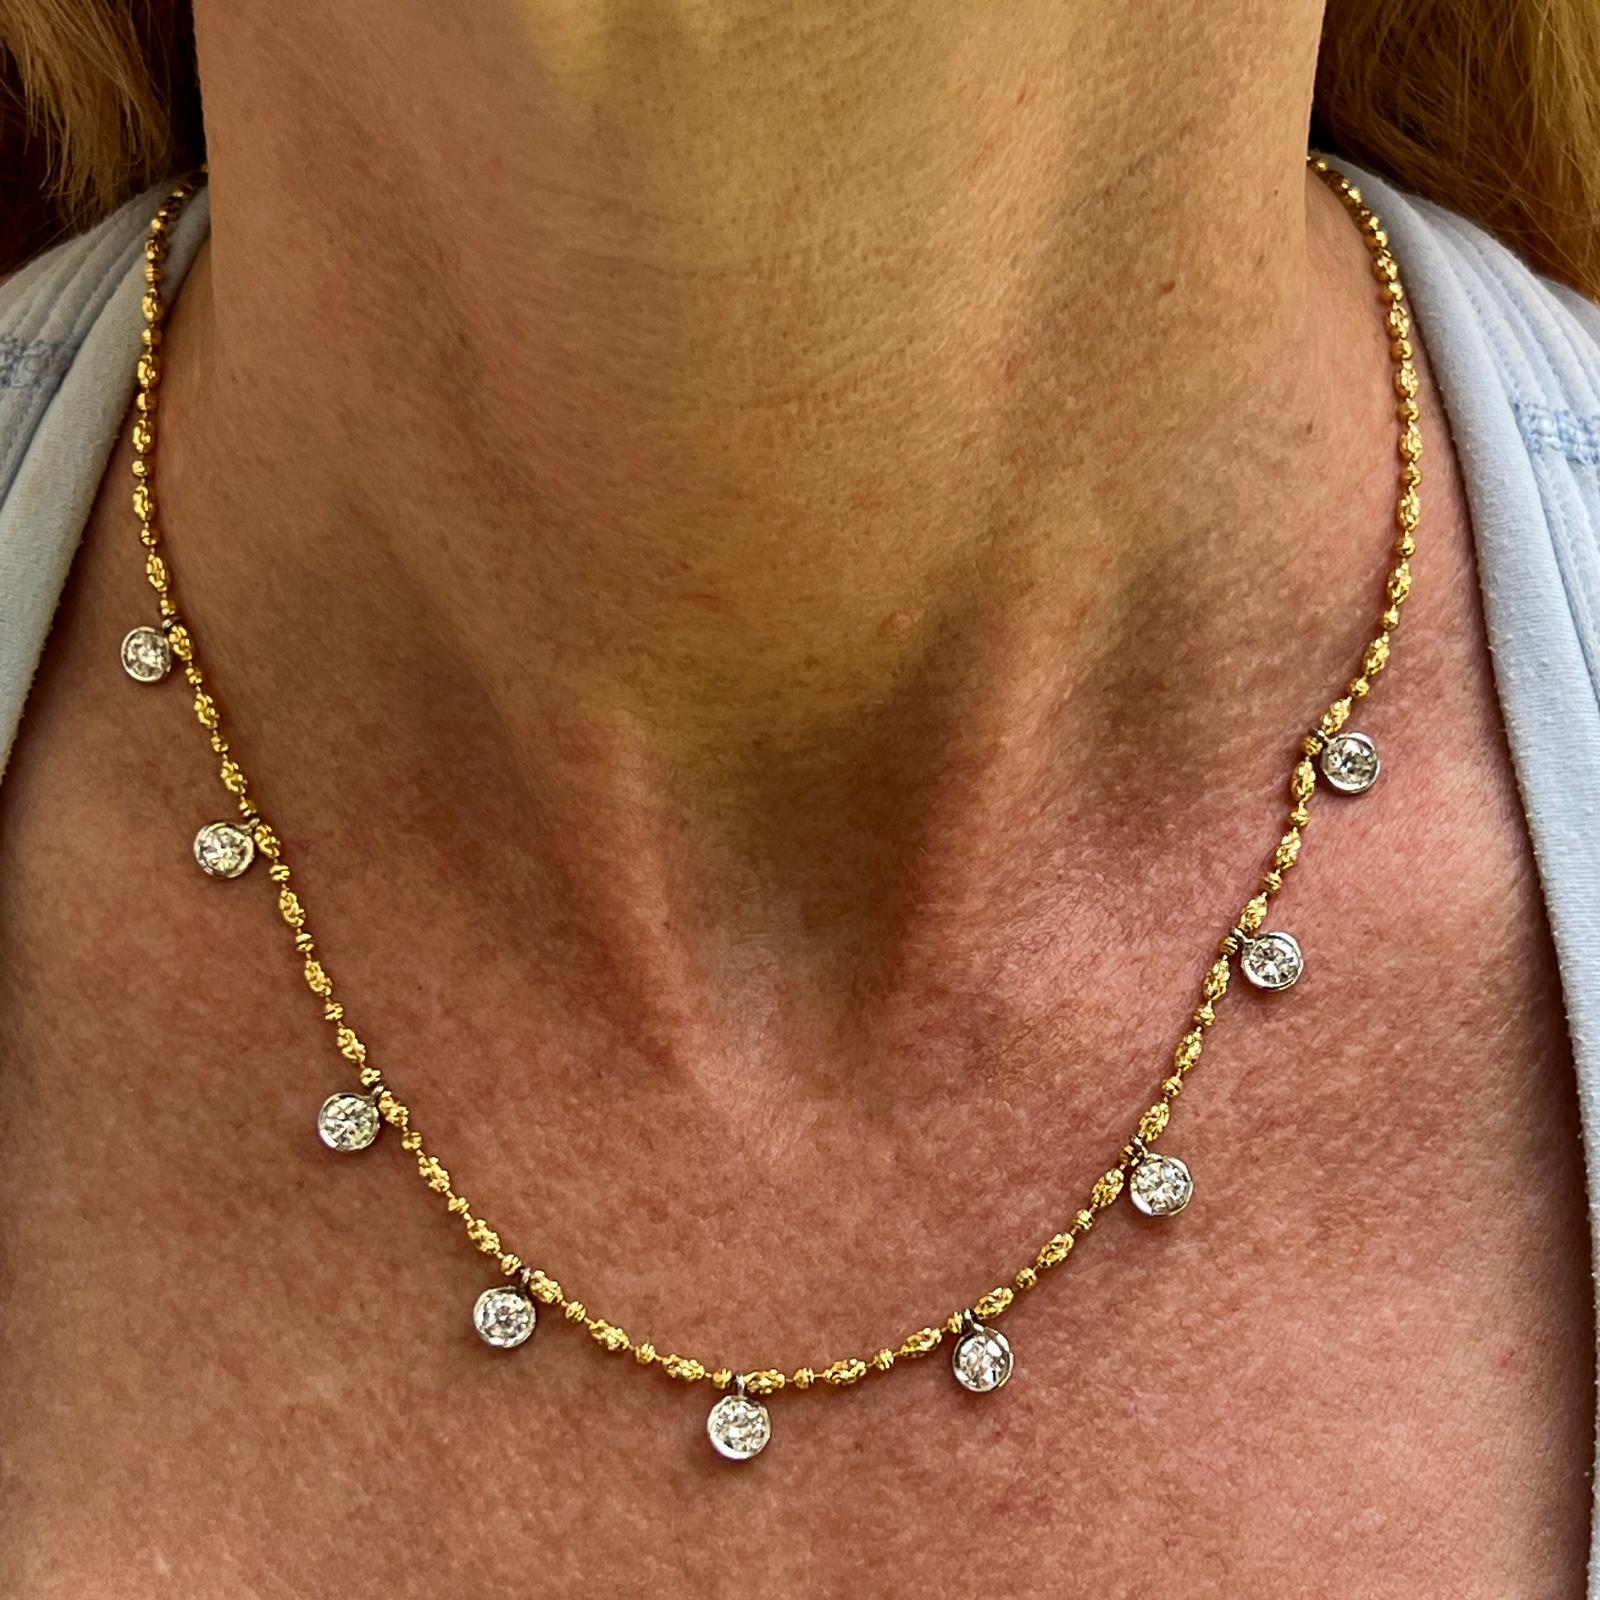 Modern diamond drop necklace crafted in 14 karat yellow and white gold. The necklace features 9 round brilliant cut diamond drops bezel set in white gold. The diamonds weigh 2.35 CTW and are graded G-H color and VS2- SI1 clarity. The diamond cut